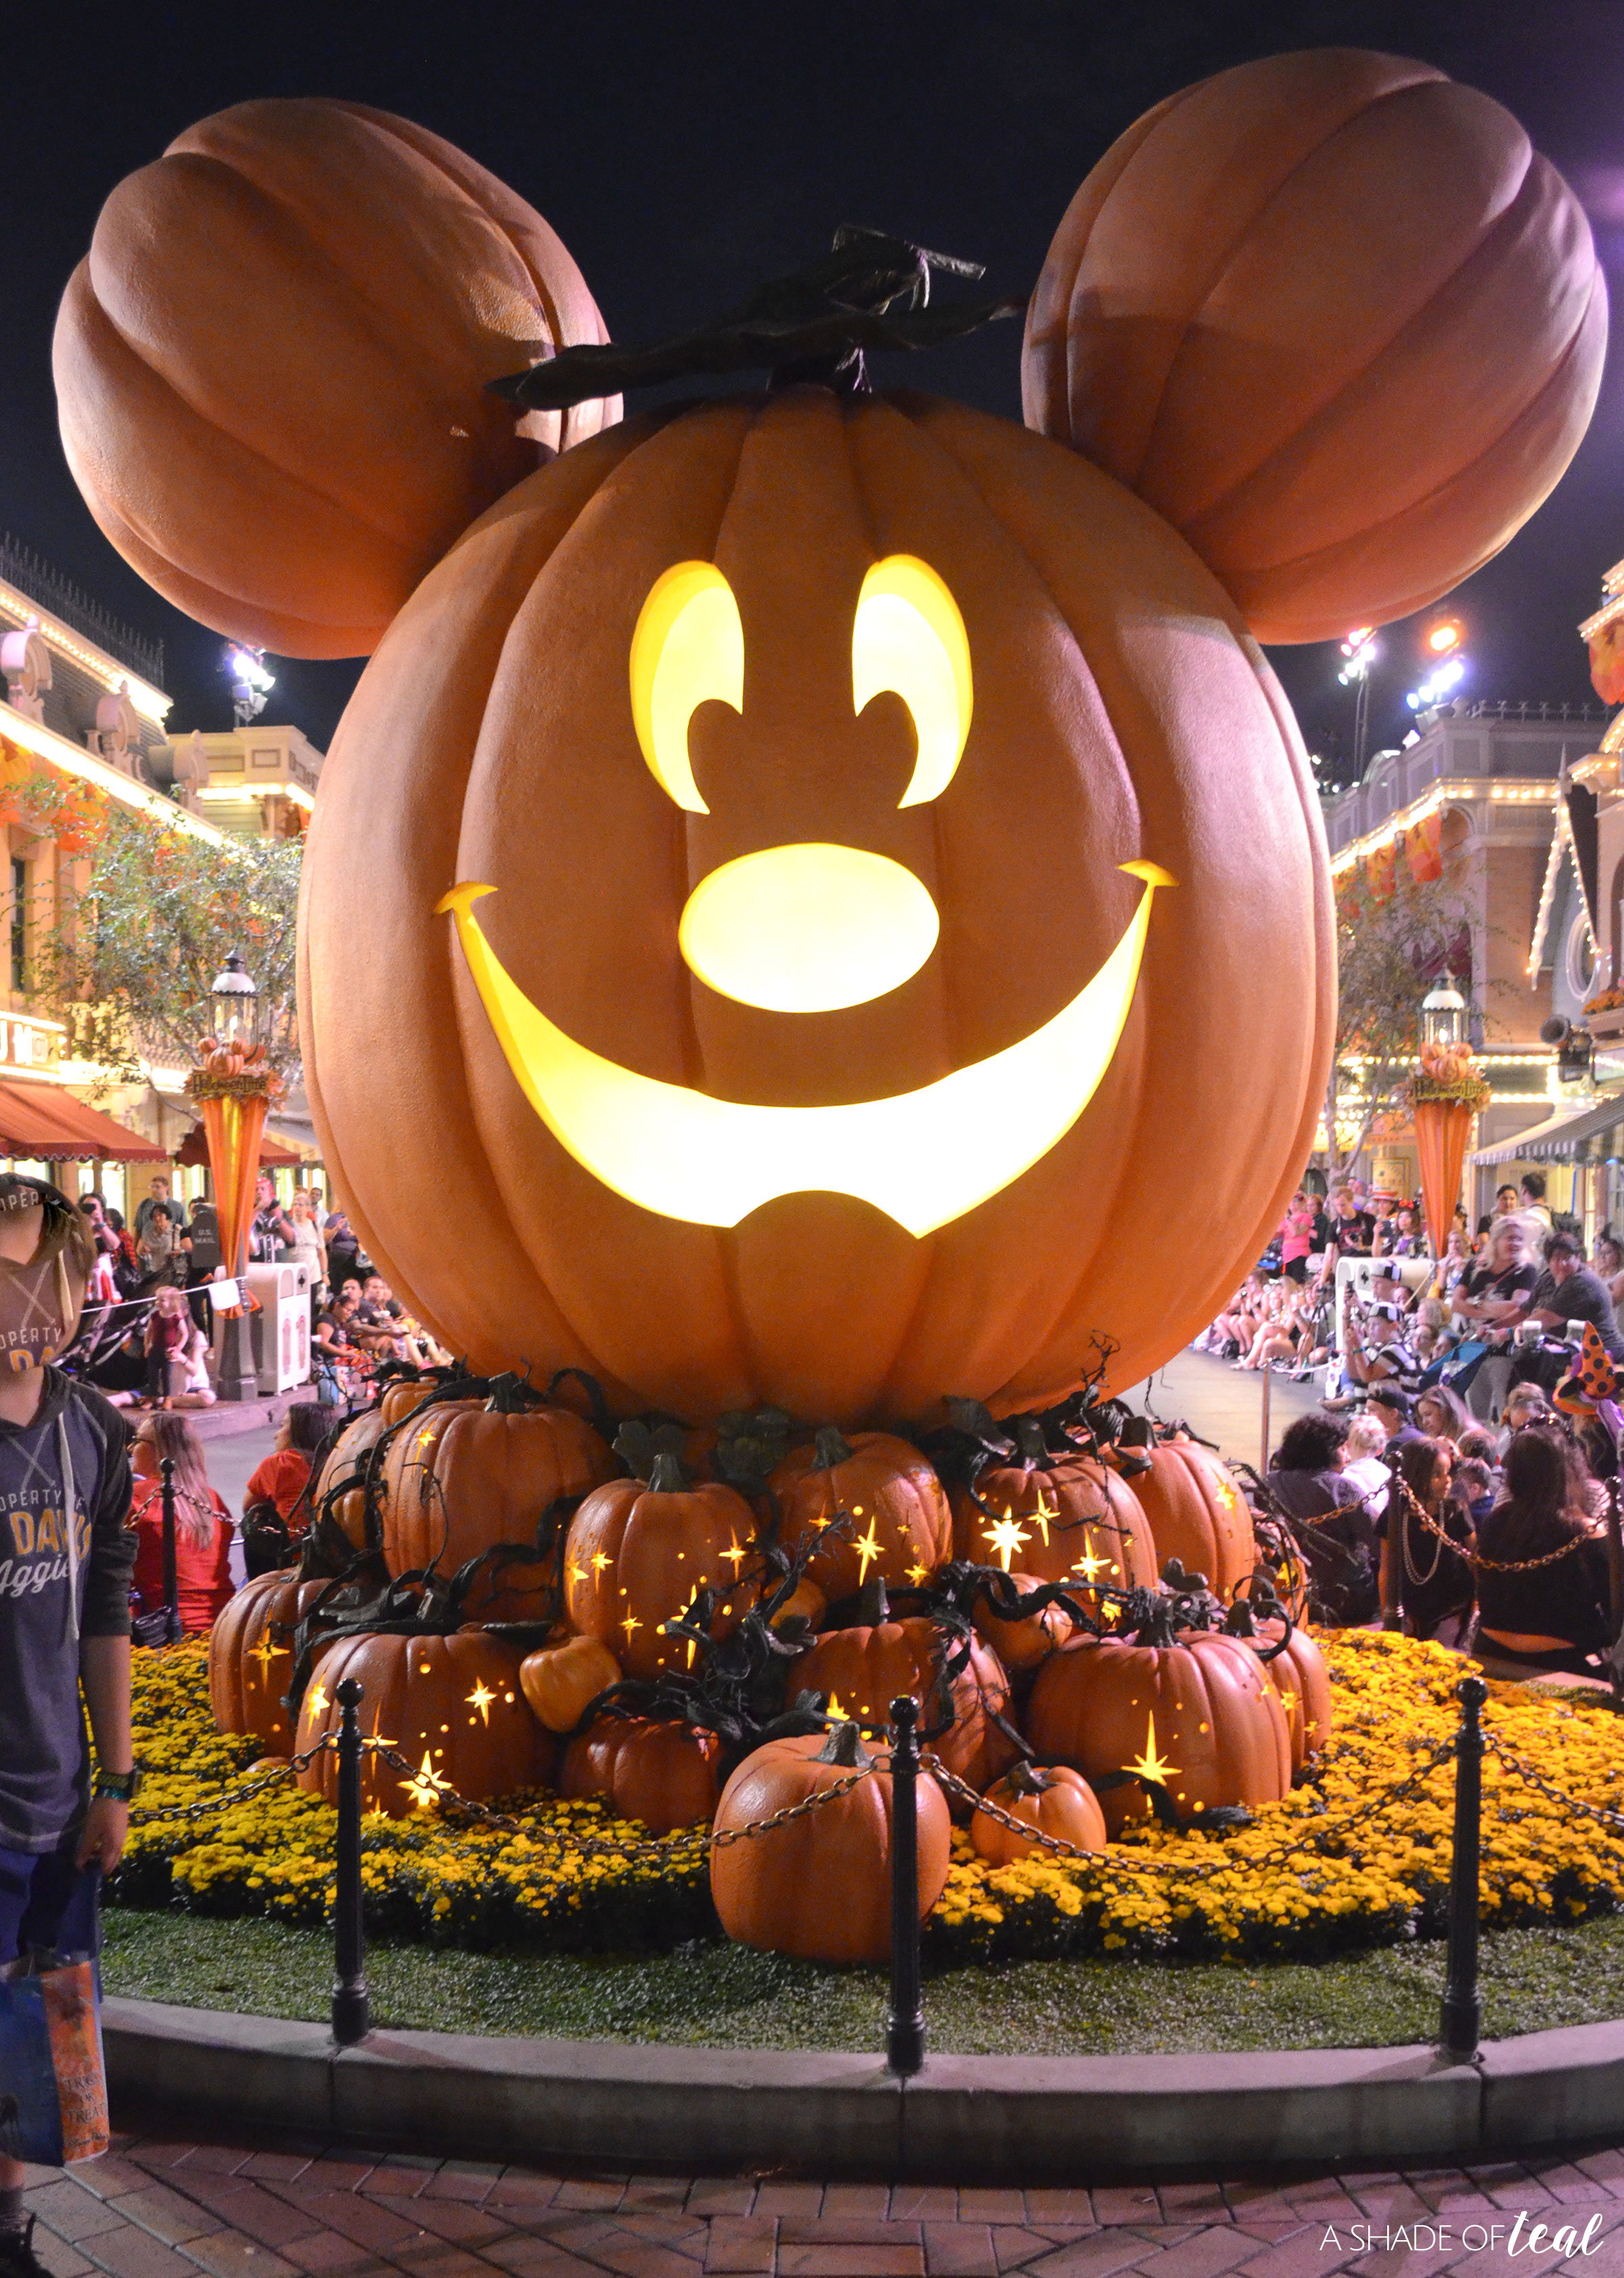 A Magical Halloween with Disney Decorations